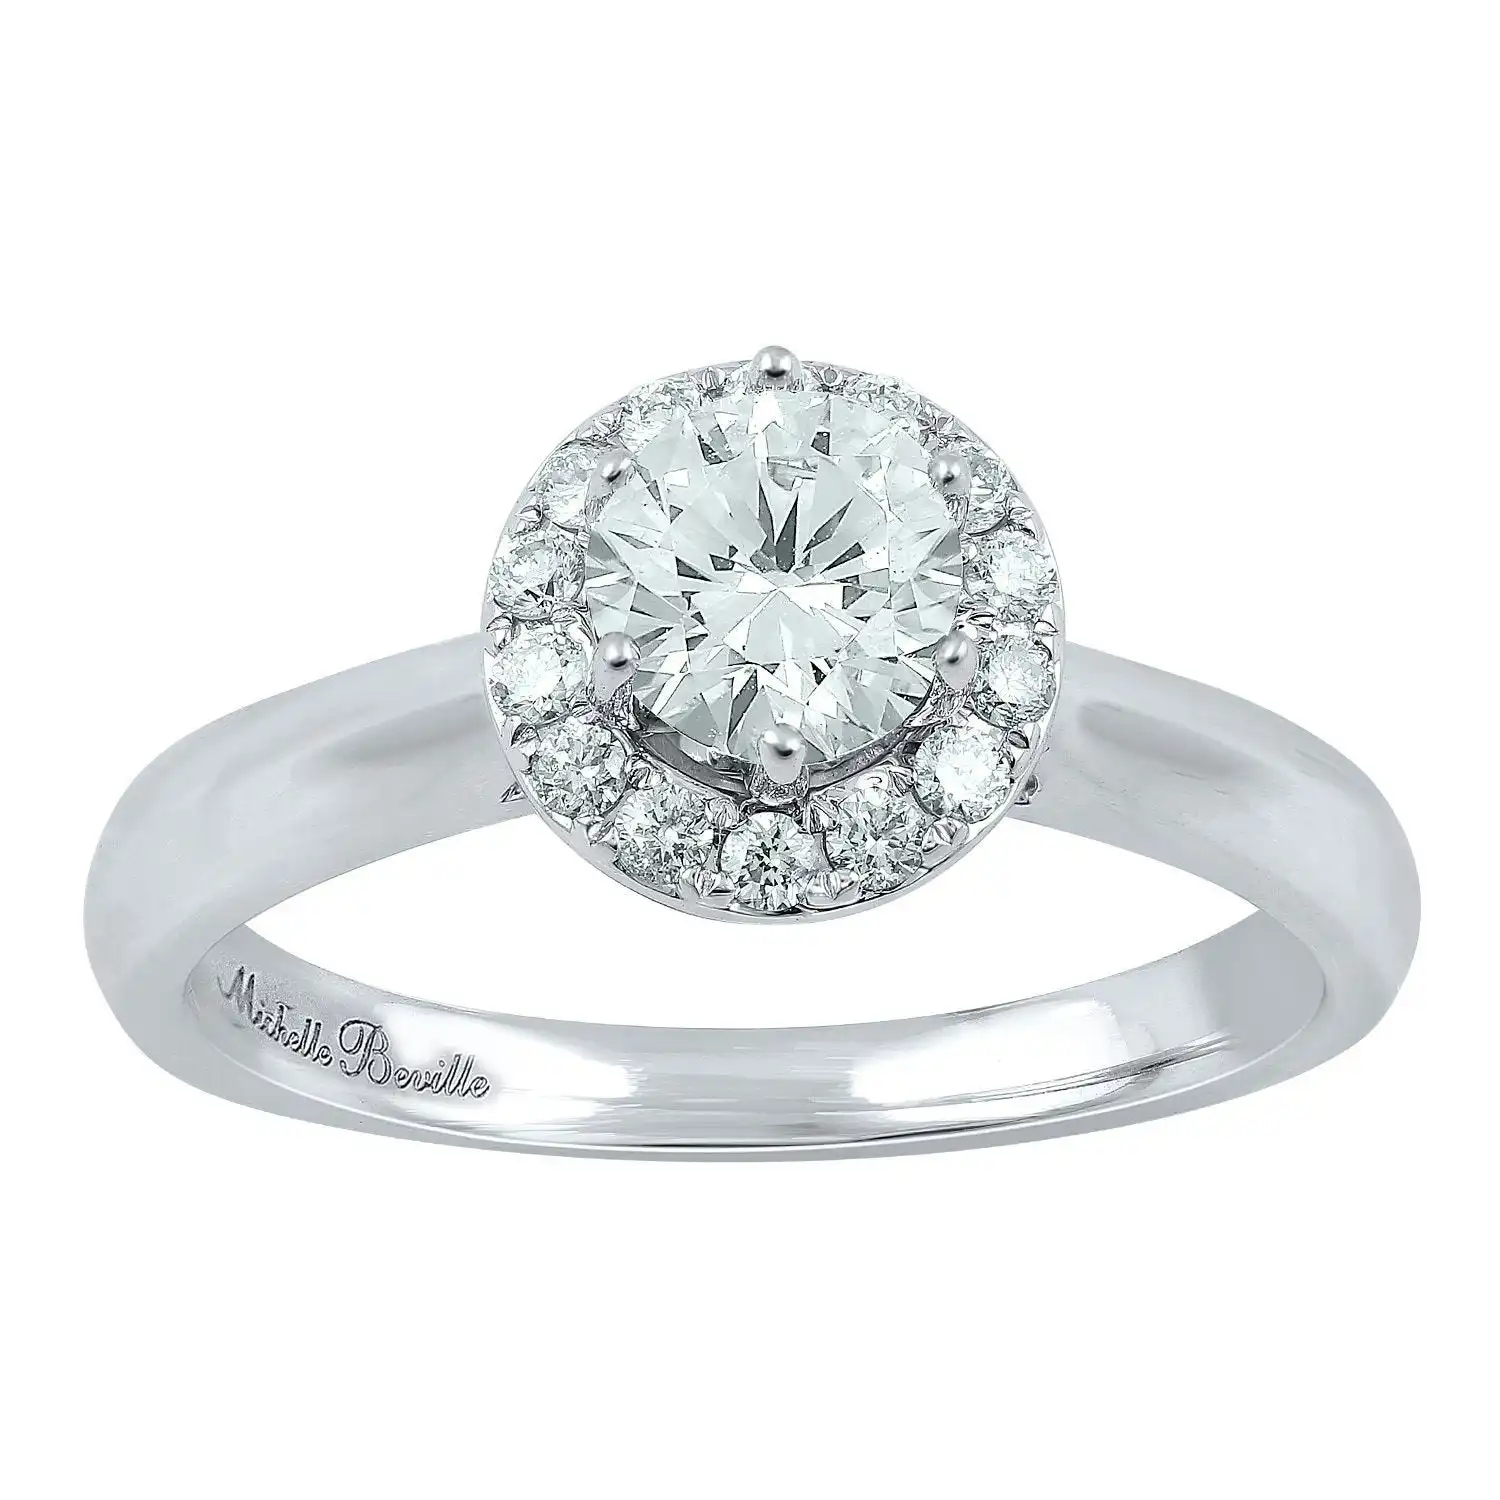 Love by Michelle Beville Halo Solitaire Ring with 0.80ct of Diamonds in 18ct White Gold